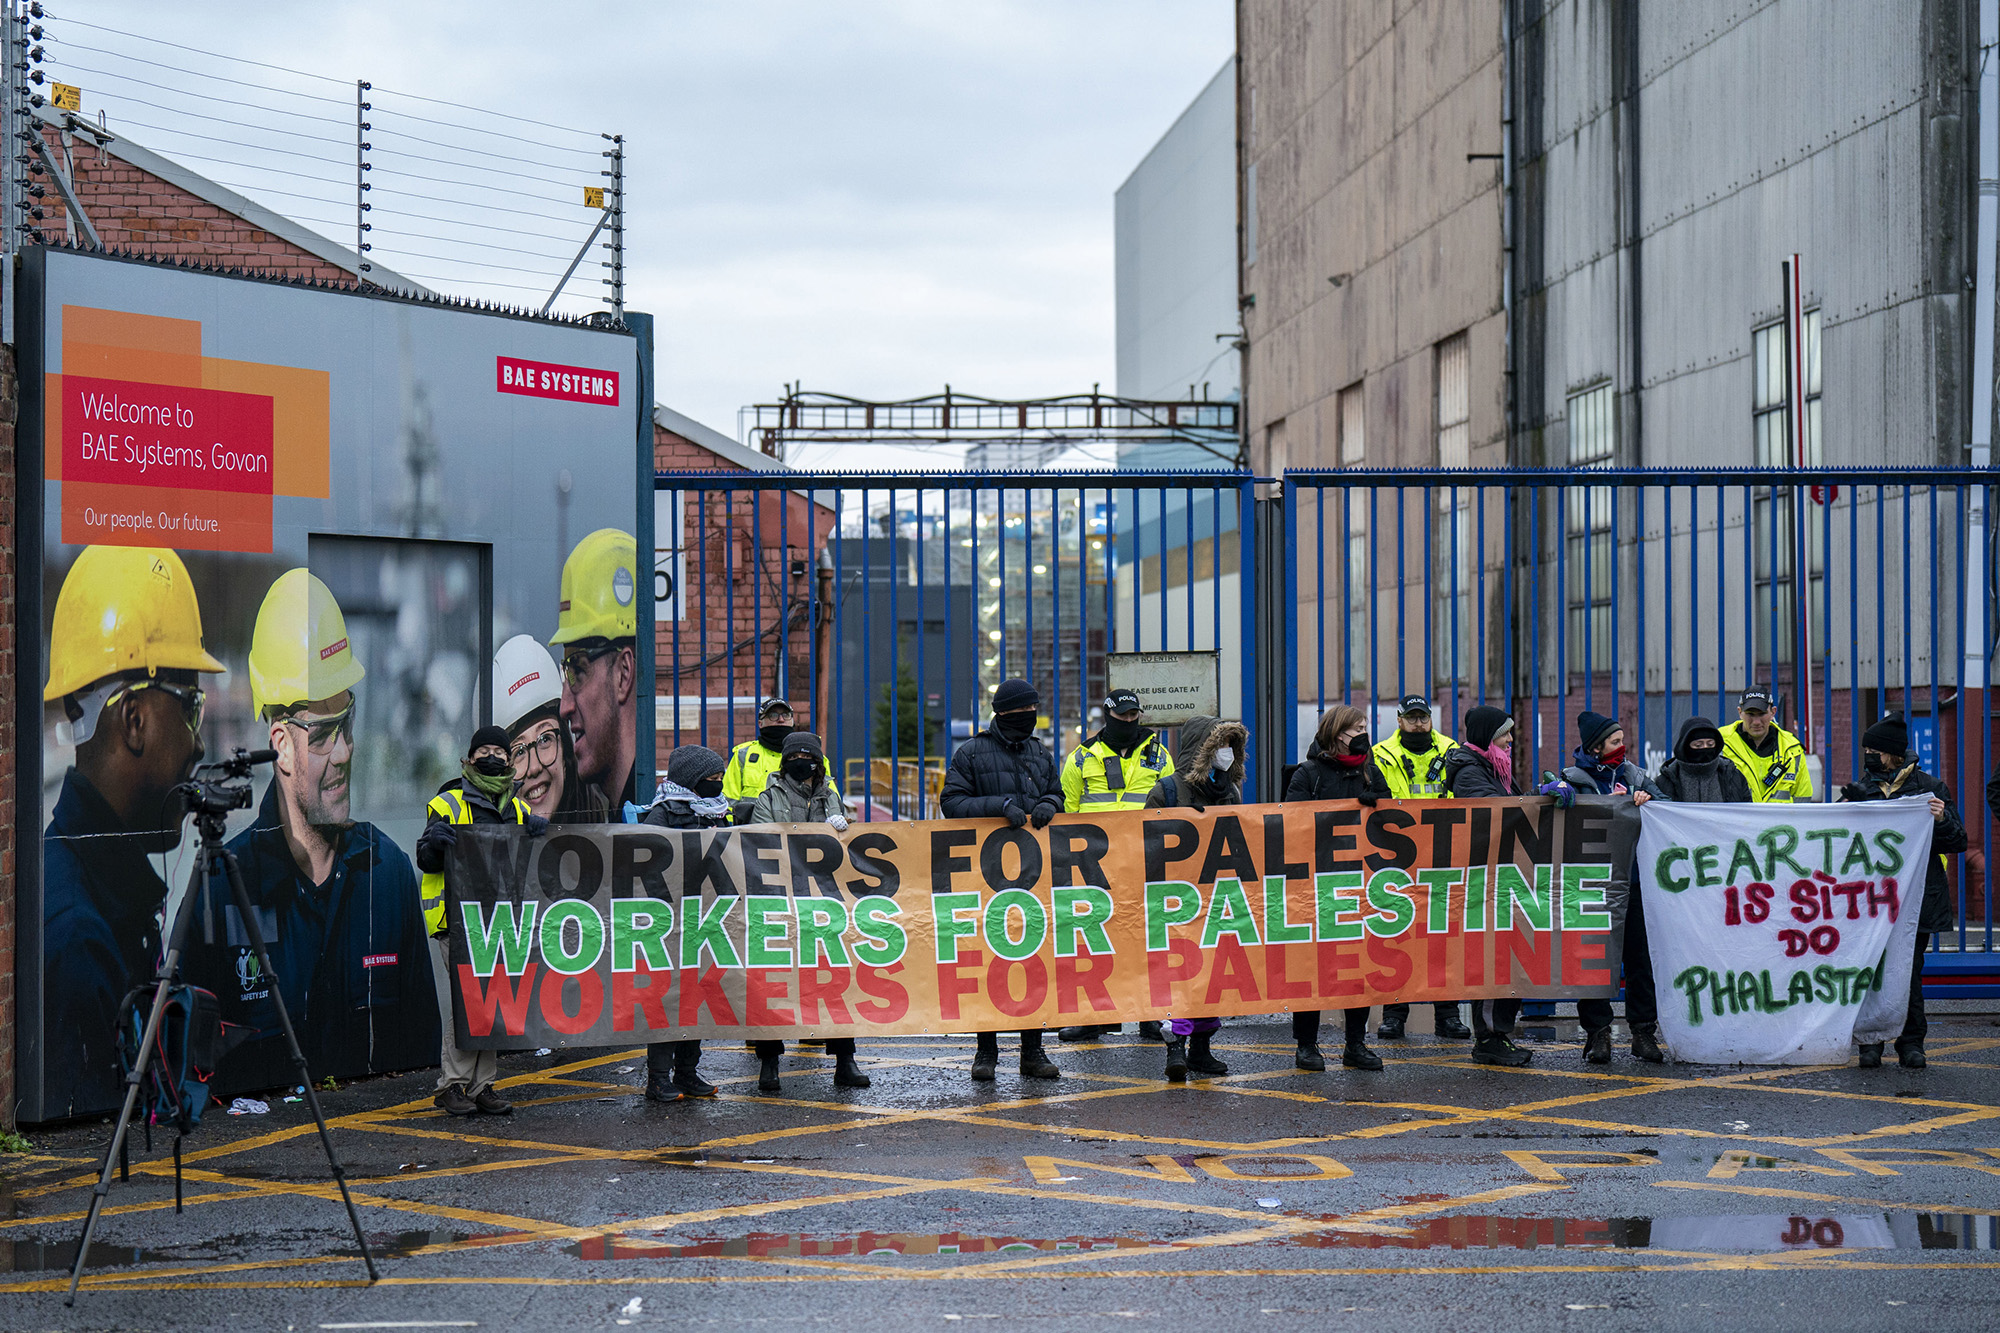 Protesters form a blockade outside BAE Systems in Govan, Scotland, on December 7.